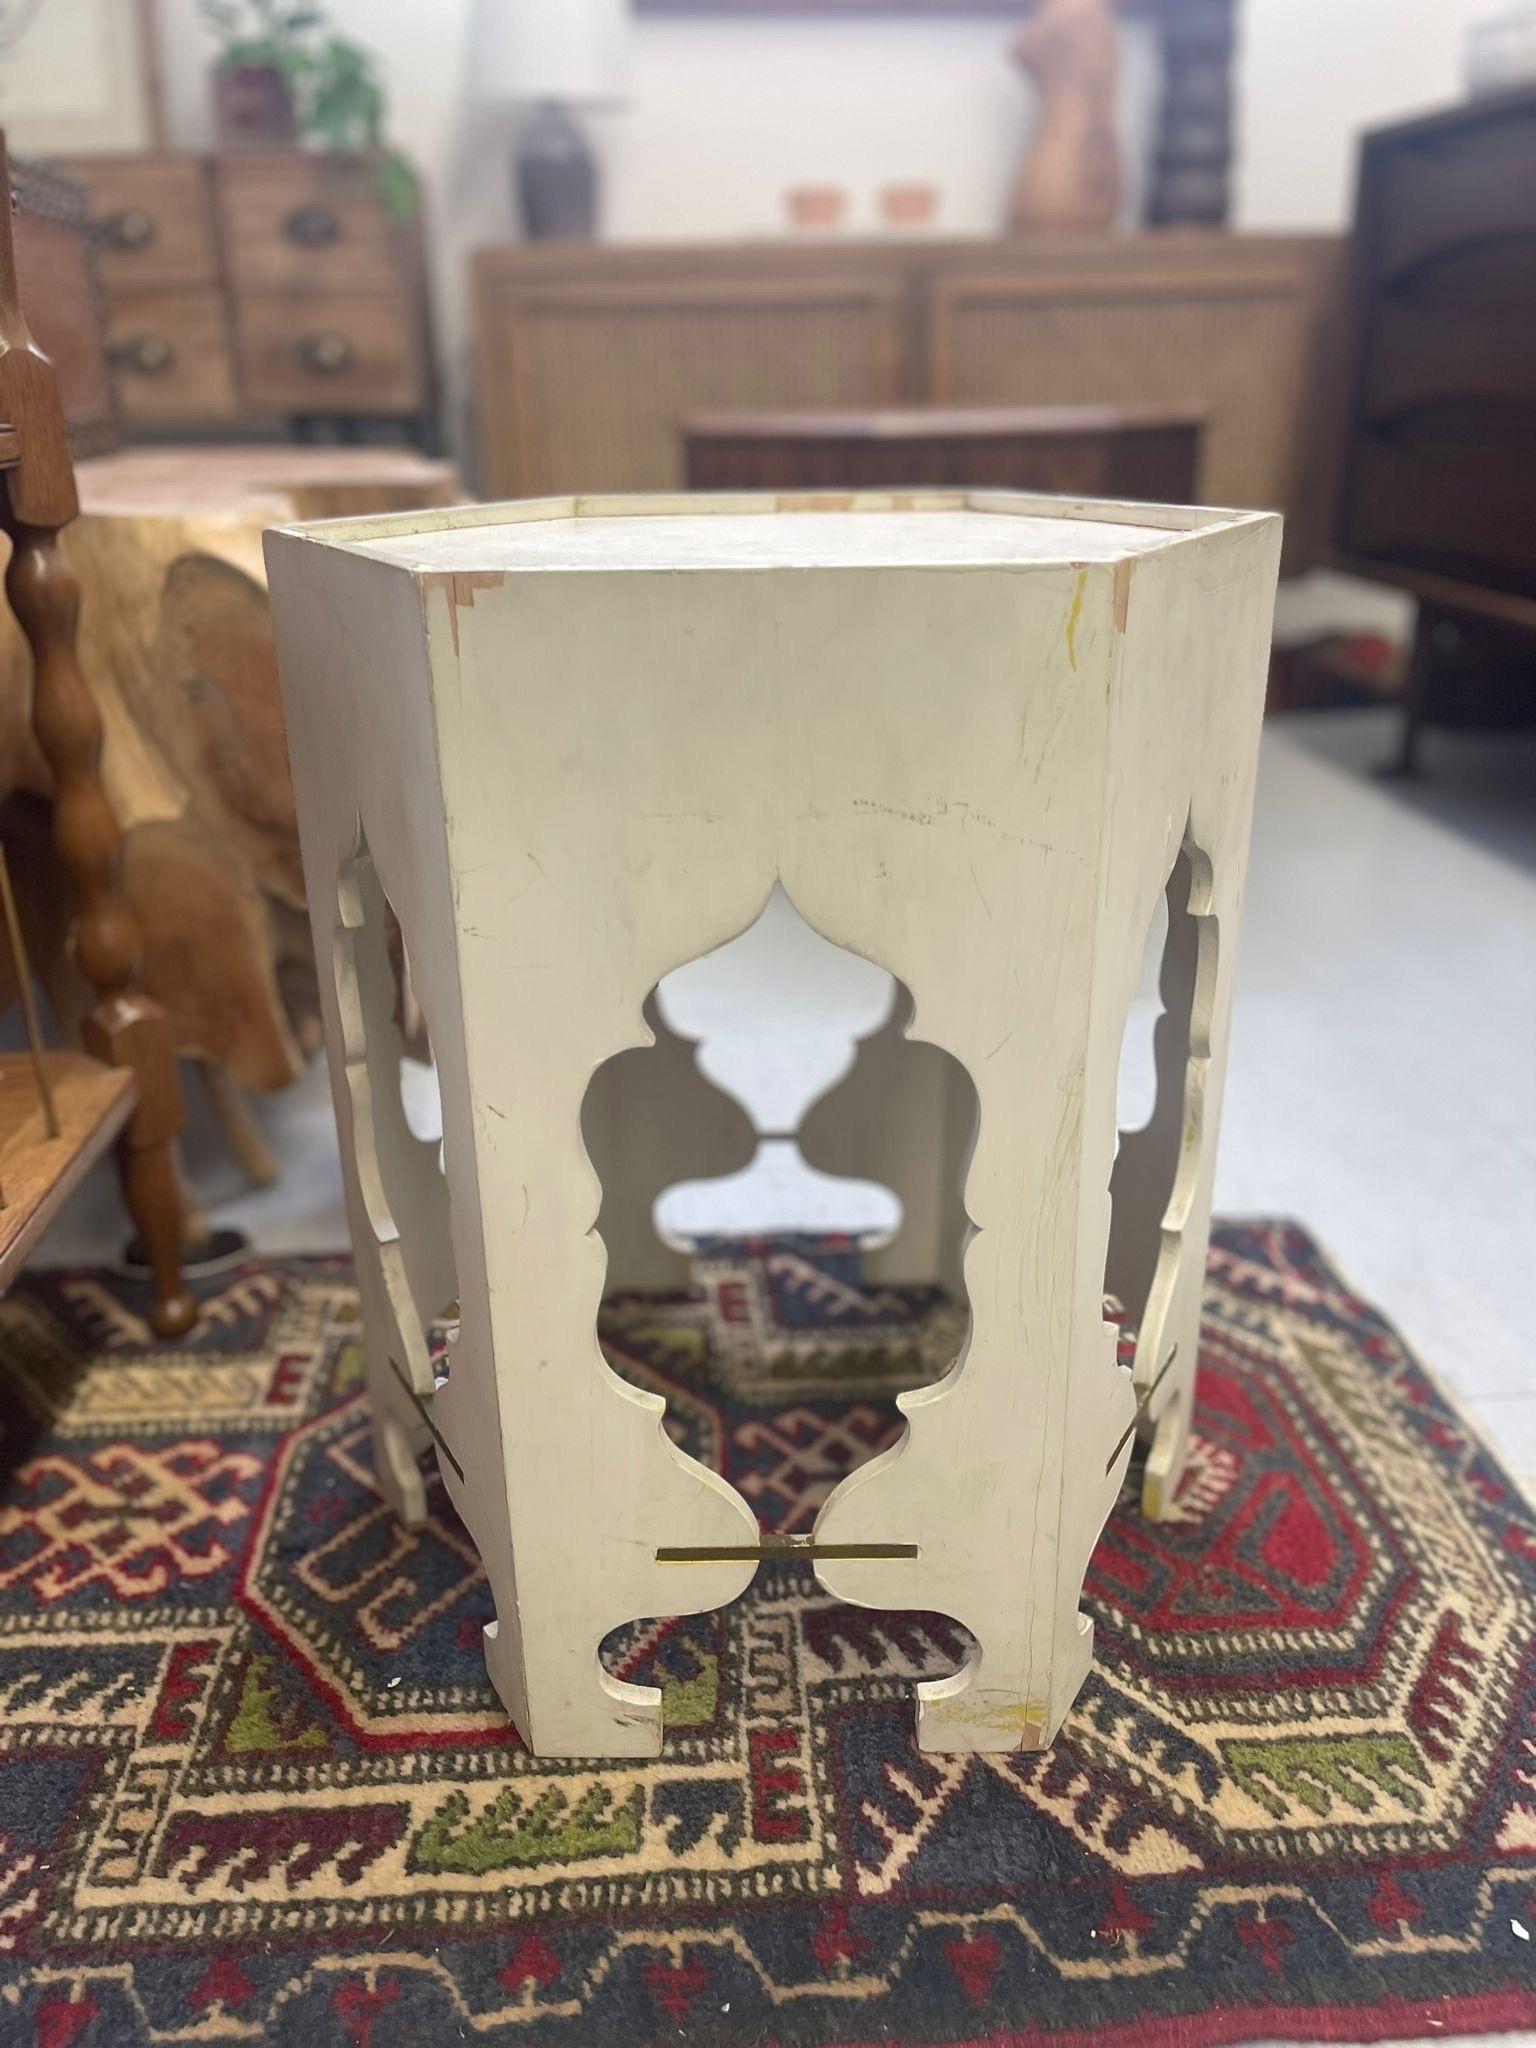 Accent Table with Unique Wood Carvings. Metal Inserts on each Side. Vintage Condition Consistent with Age as Pictured.

Dimensions. 14 W ; 14 D ; 18 H